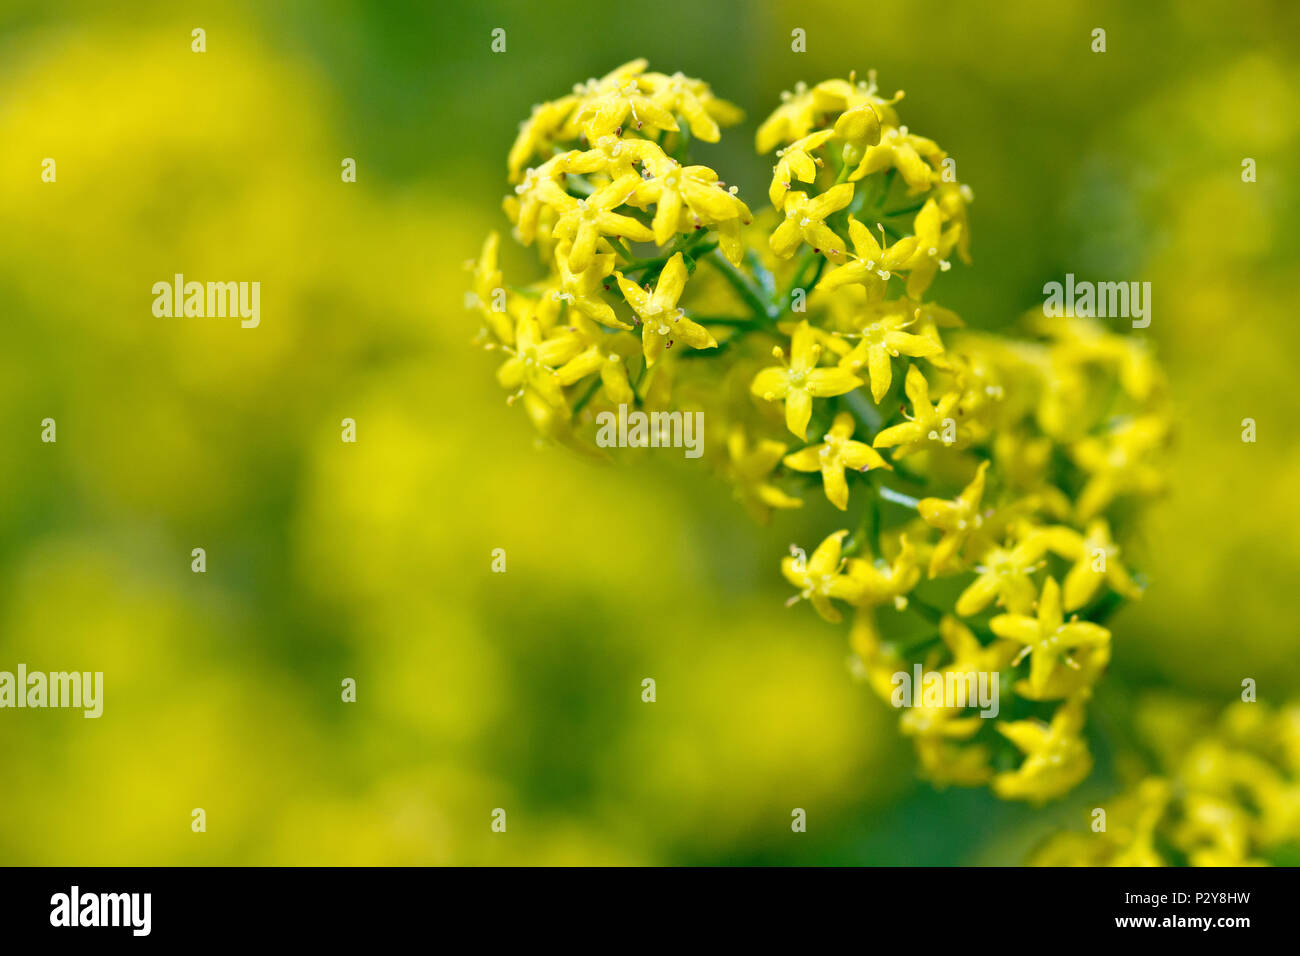 Lady's Bedstraw (galium verum), close up of a single flowering stem showing detail of the individual flowers. Stock Photo